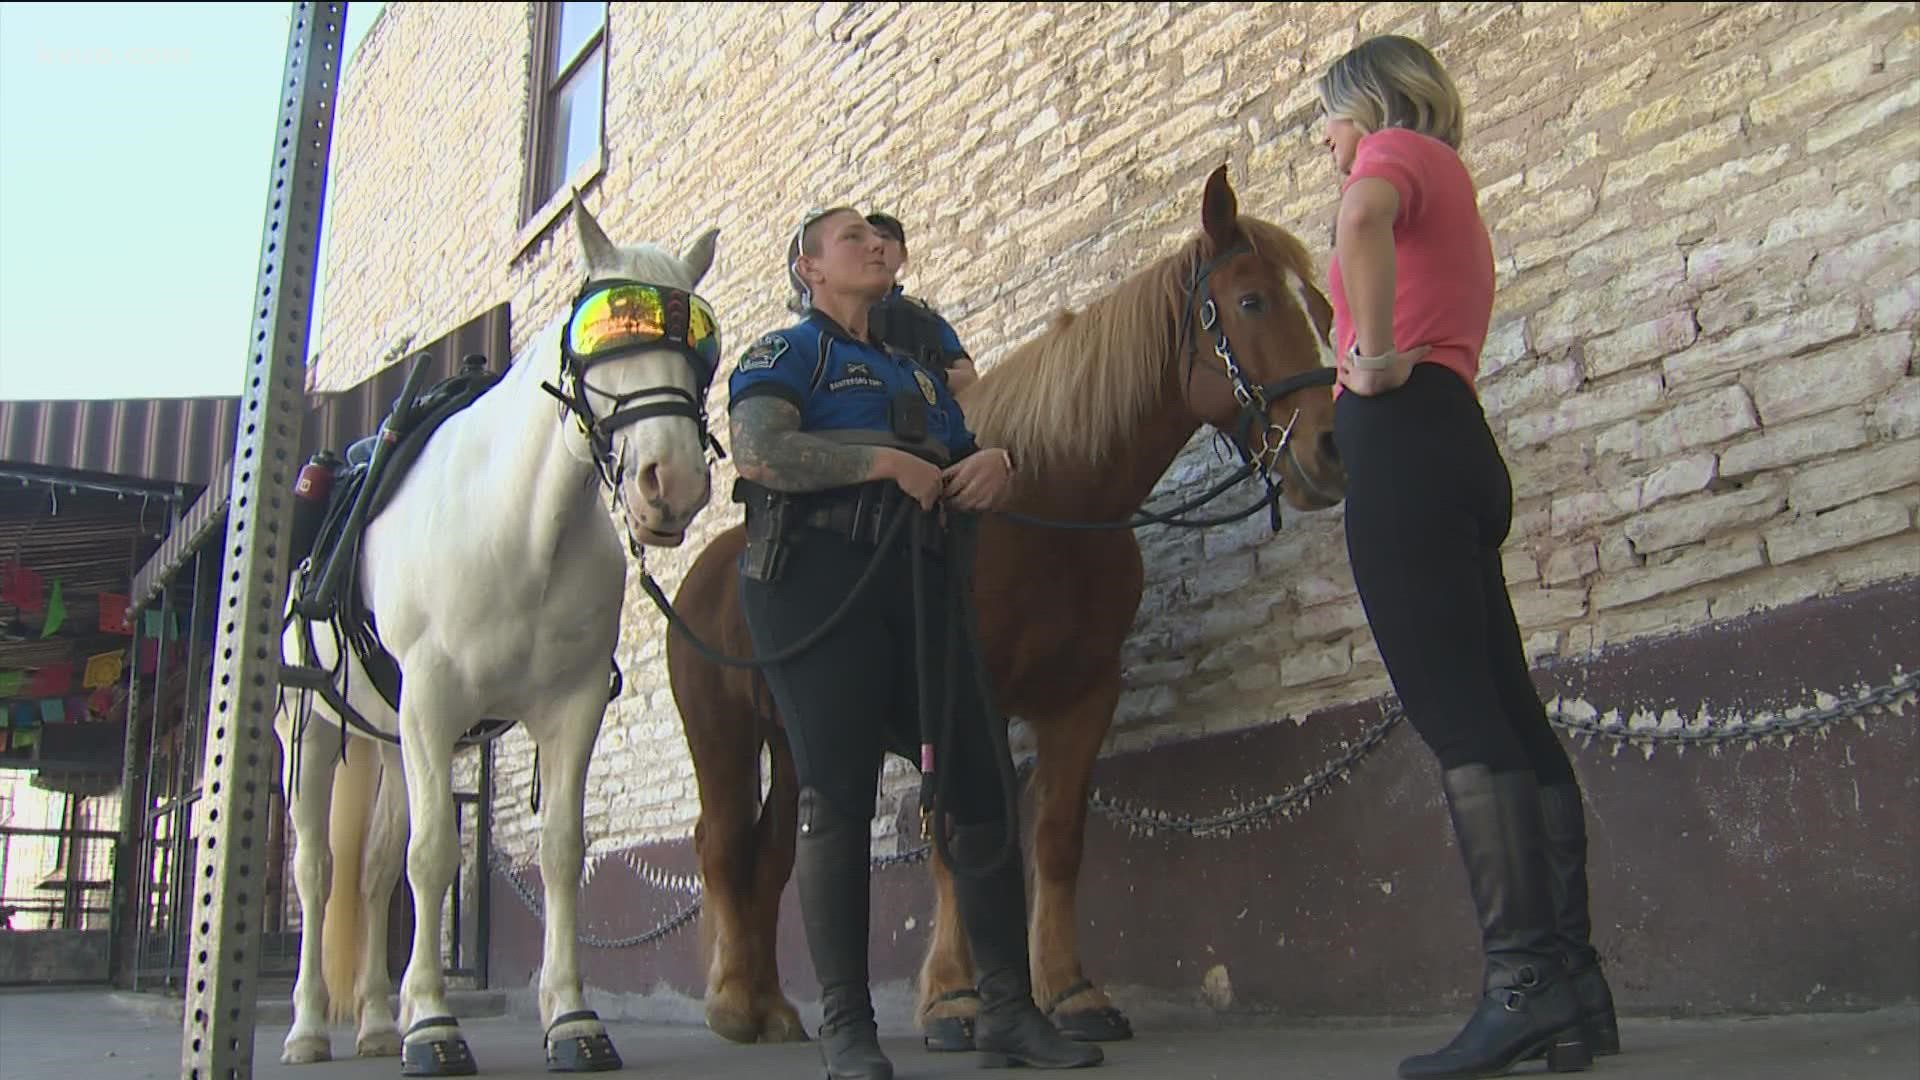 You've probably seen the Austin Police Department's Mounted Patrol Unit around town. But do you really know what they do?